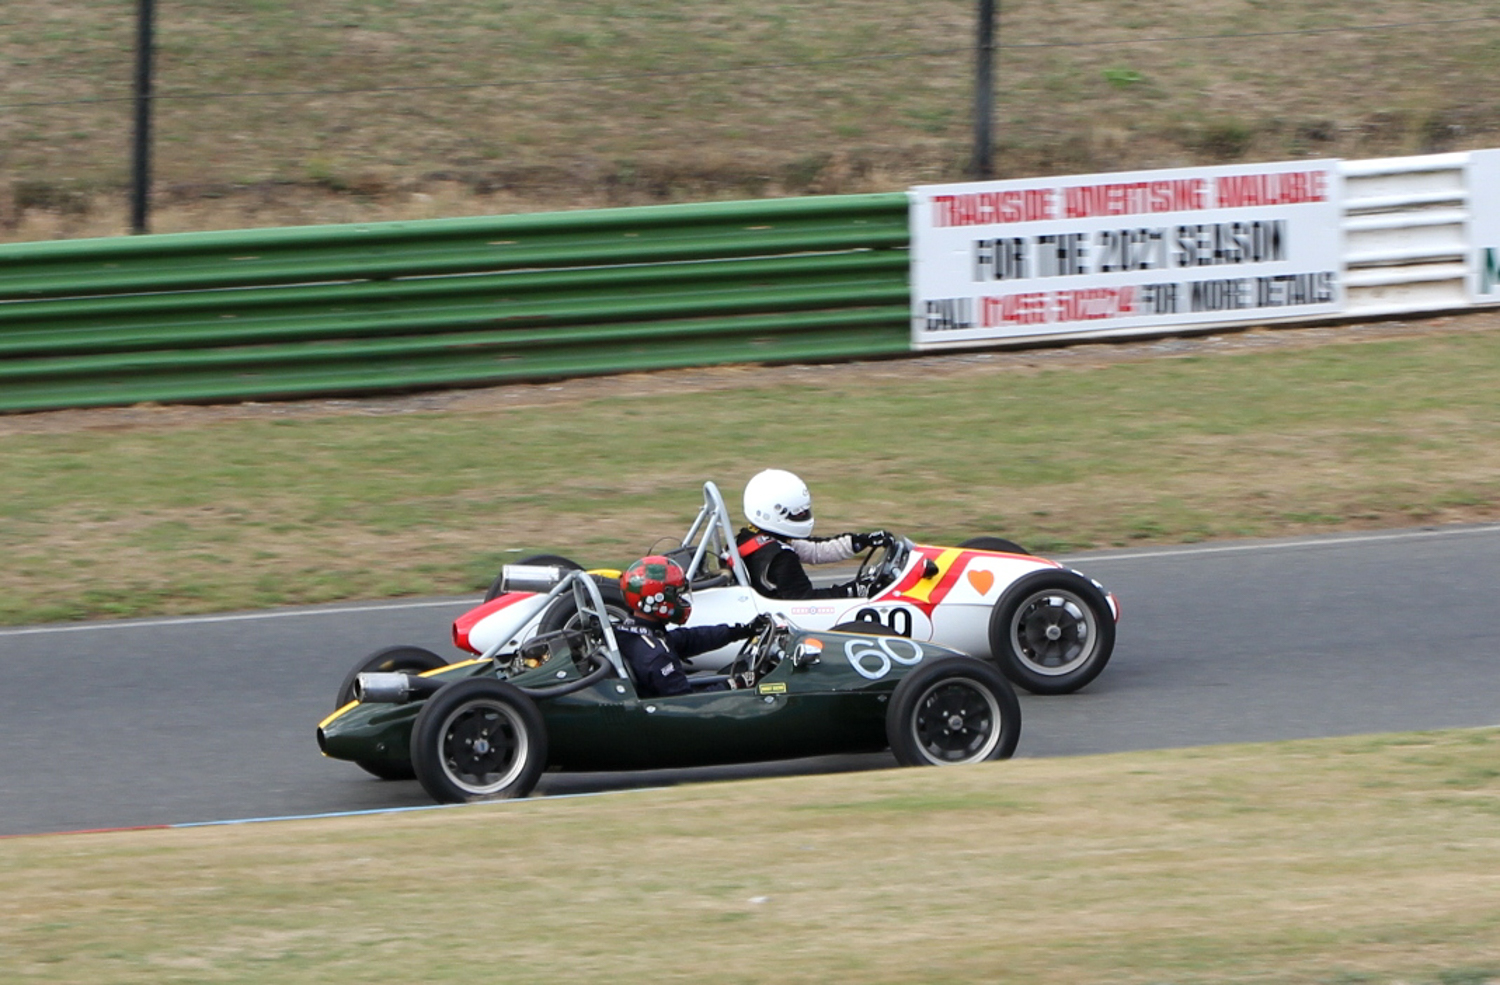 COOPER 500s INTO SHAWS HAIRPIN - TOM WATERFIELD INSIDE ALEX WILSON. Picasa